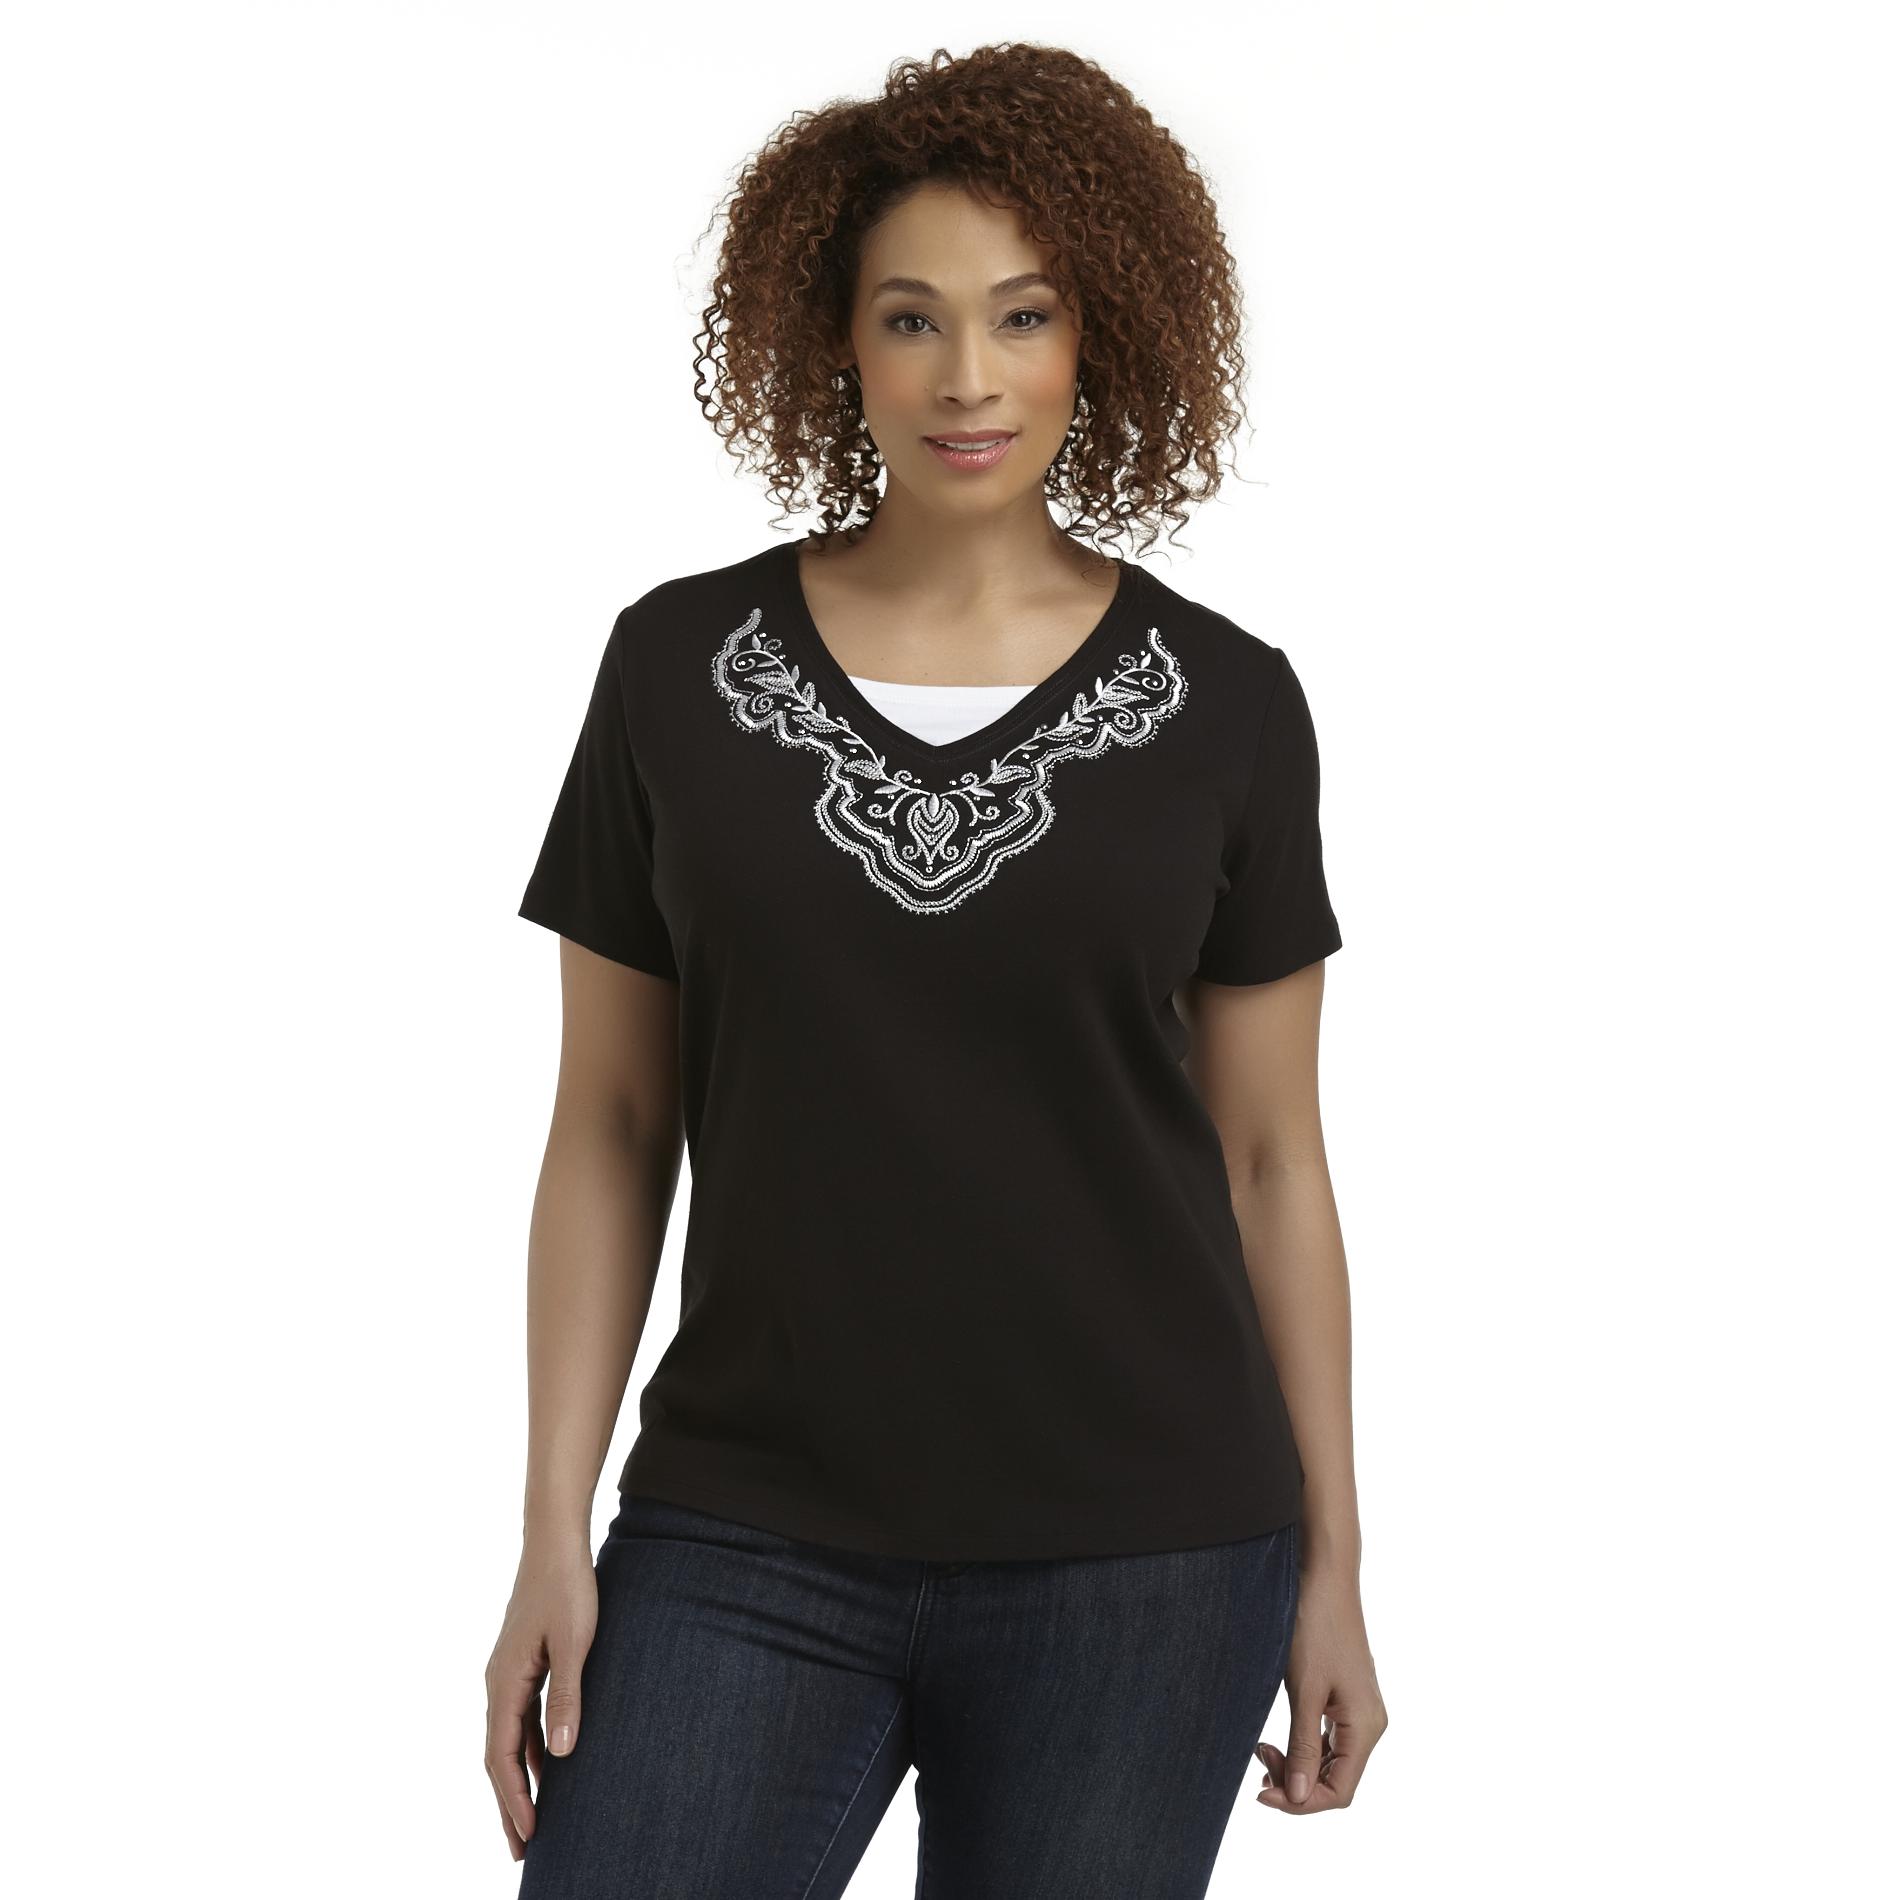 Basic Editions Women's Plus Layered-Look Embellished Top - Paisley